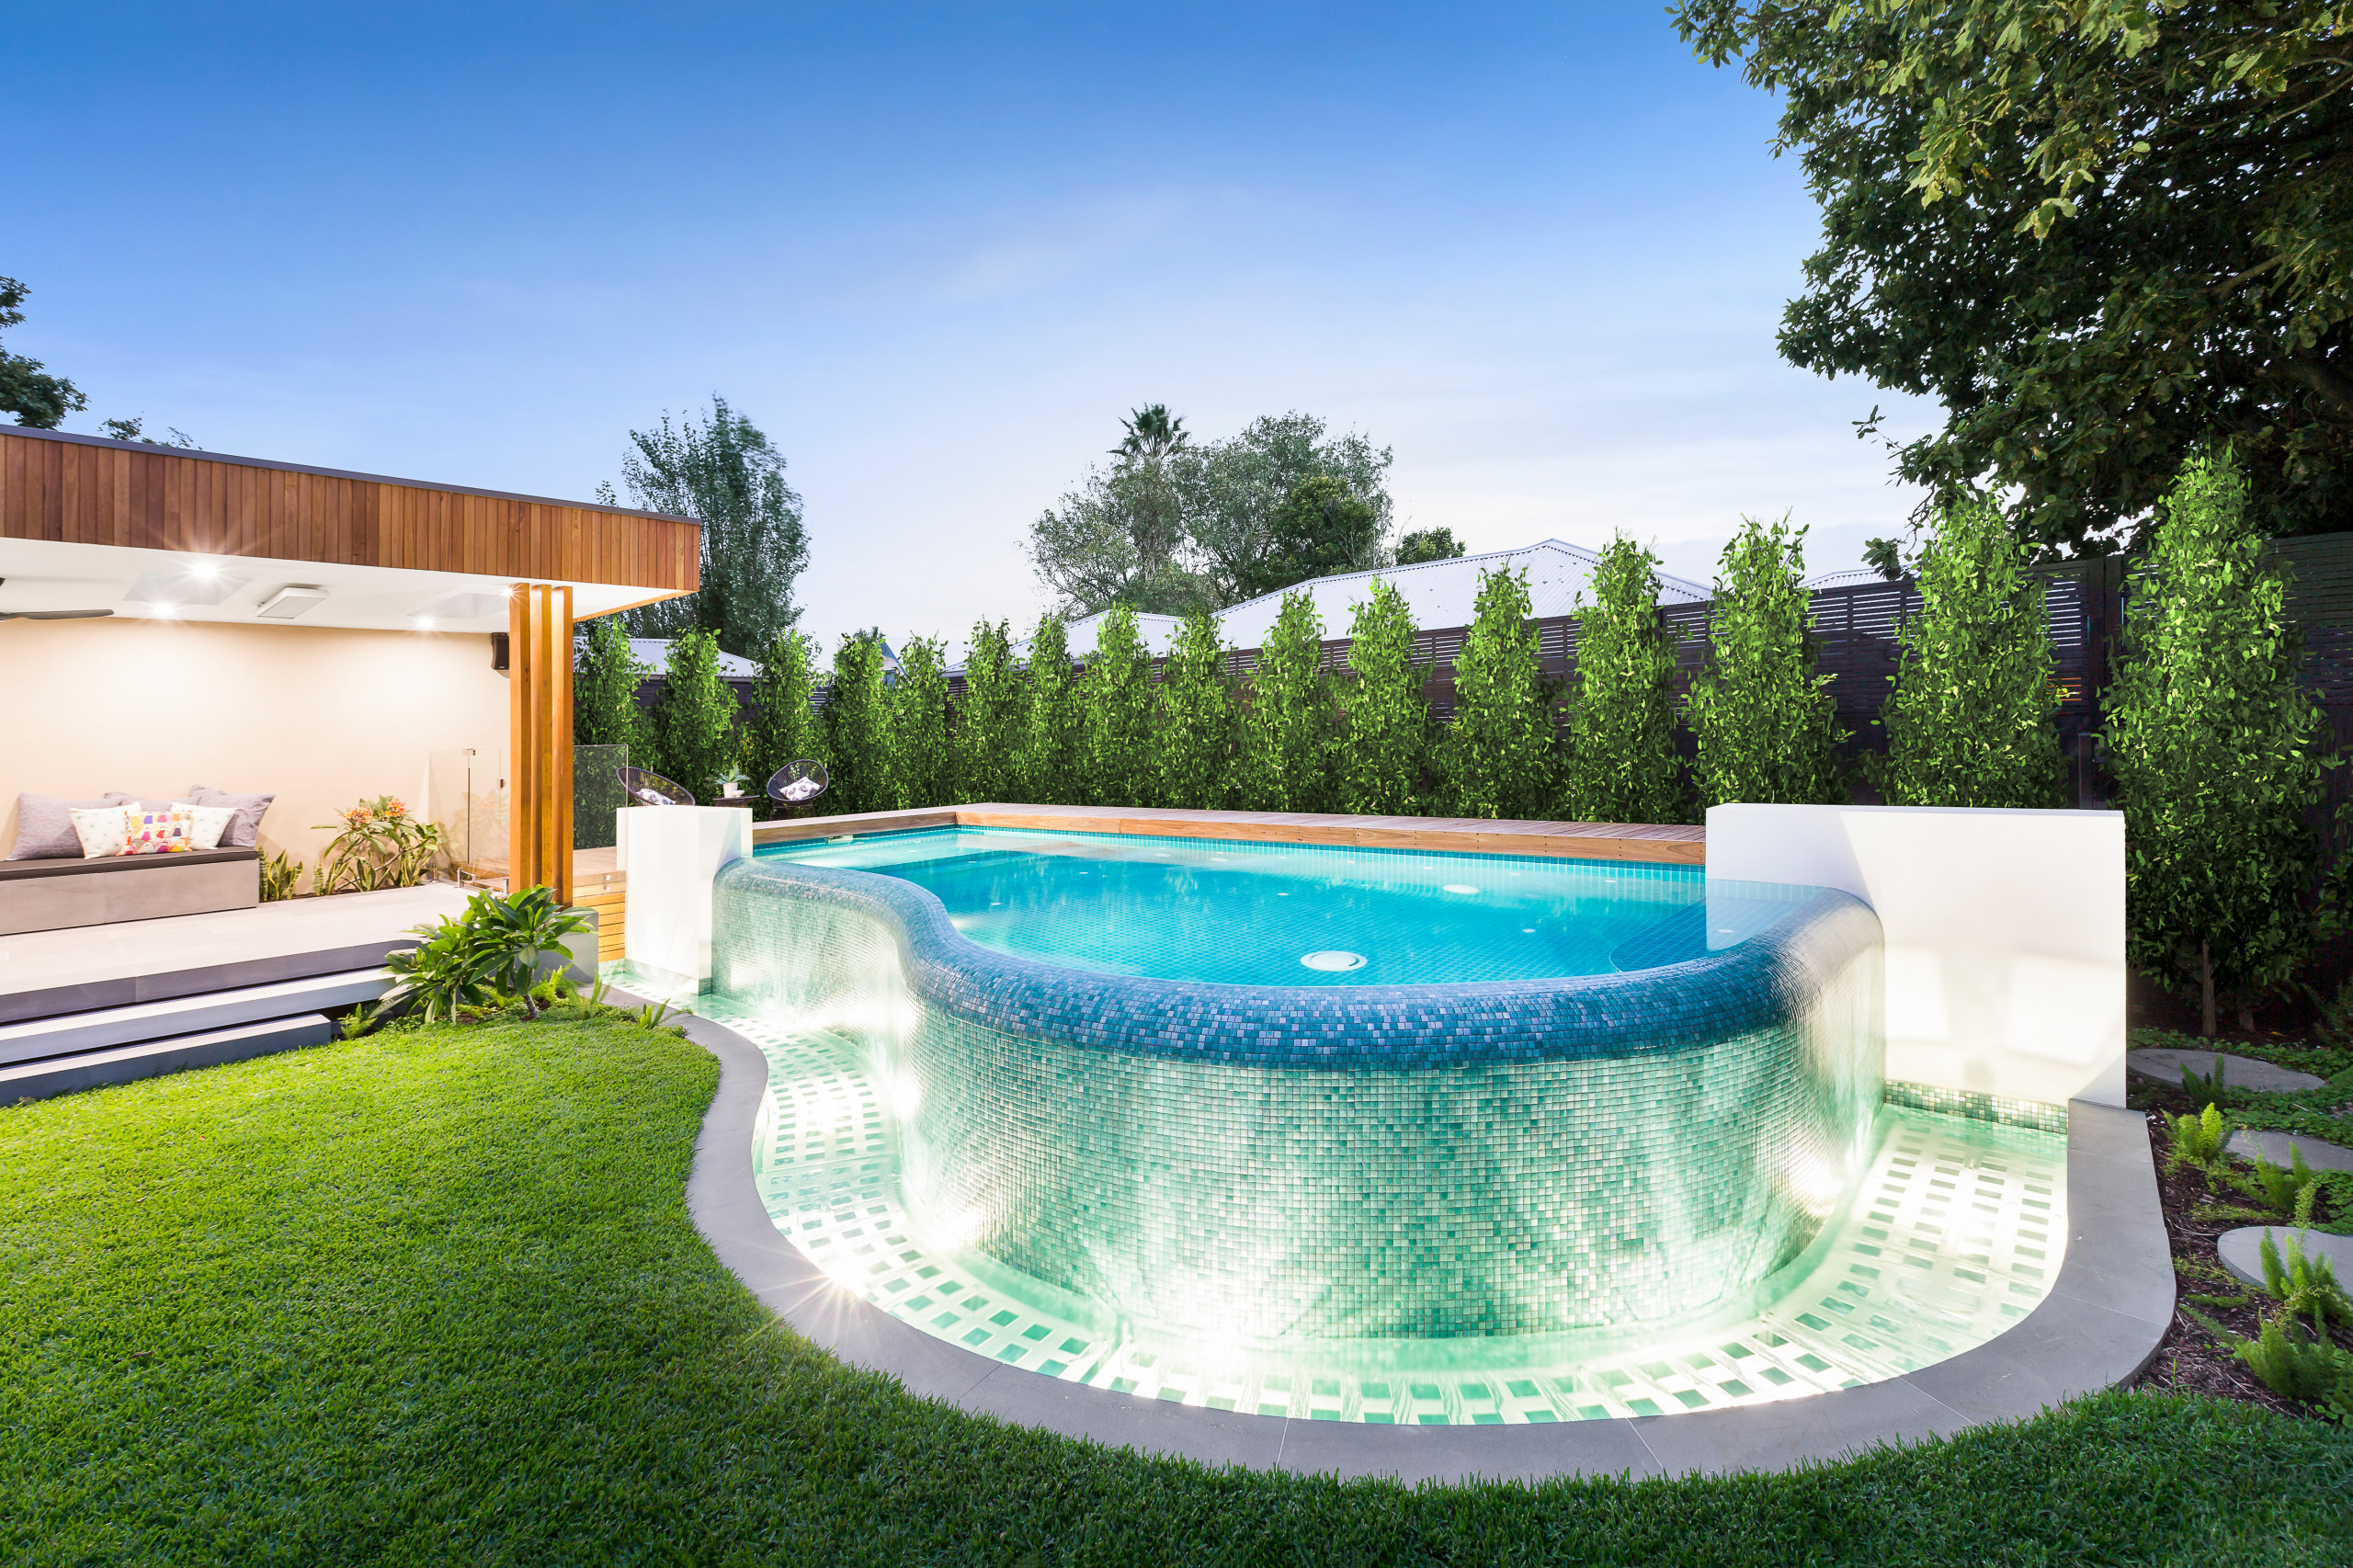 10 Creative Above Ground Oval Pool Landscaping Ideas To Transform Your Backyard